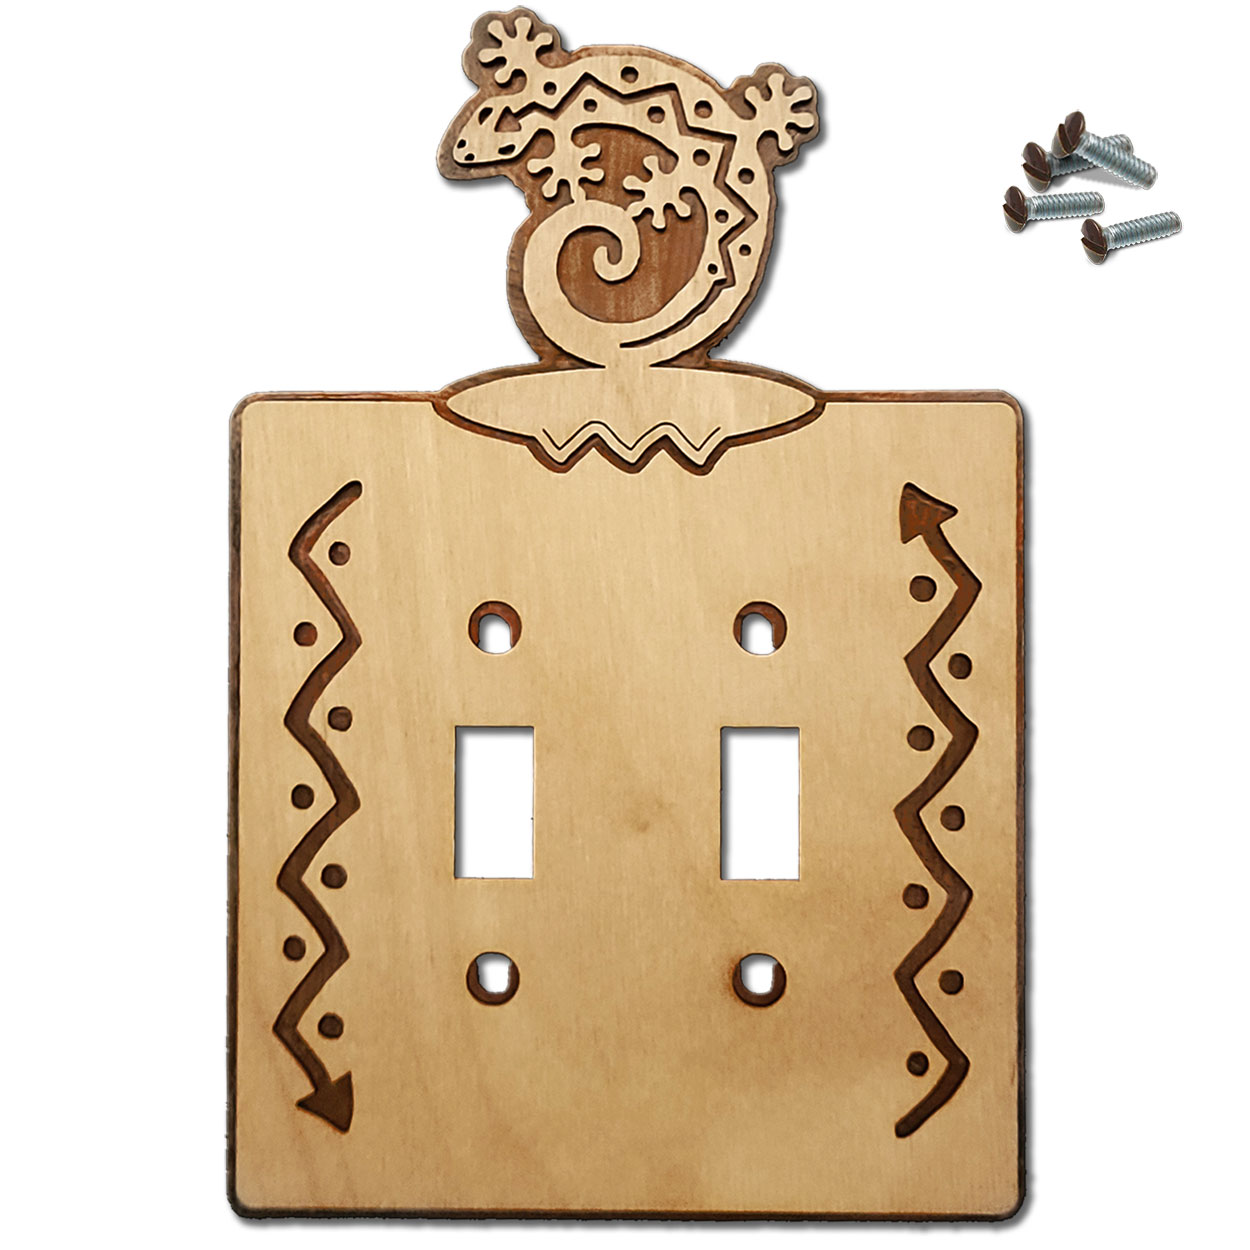 167912S -  Curled Gecko Southwestern Decor Double Standard Switch Plate in Natural Birch